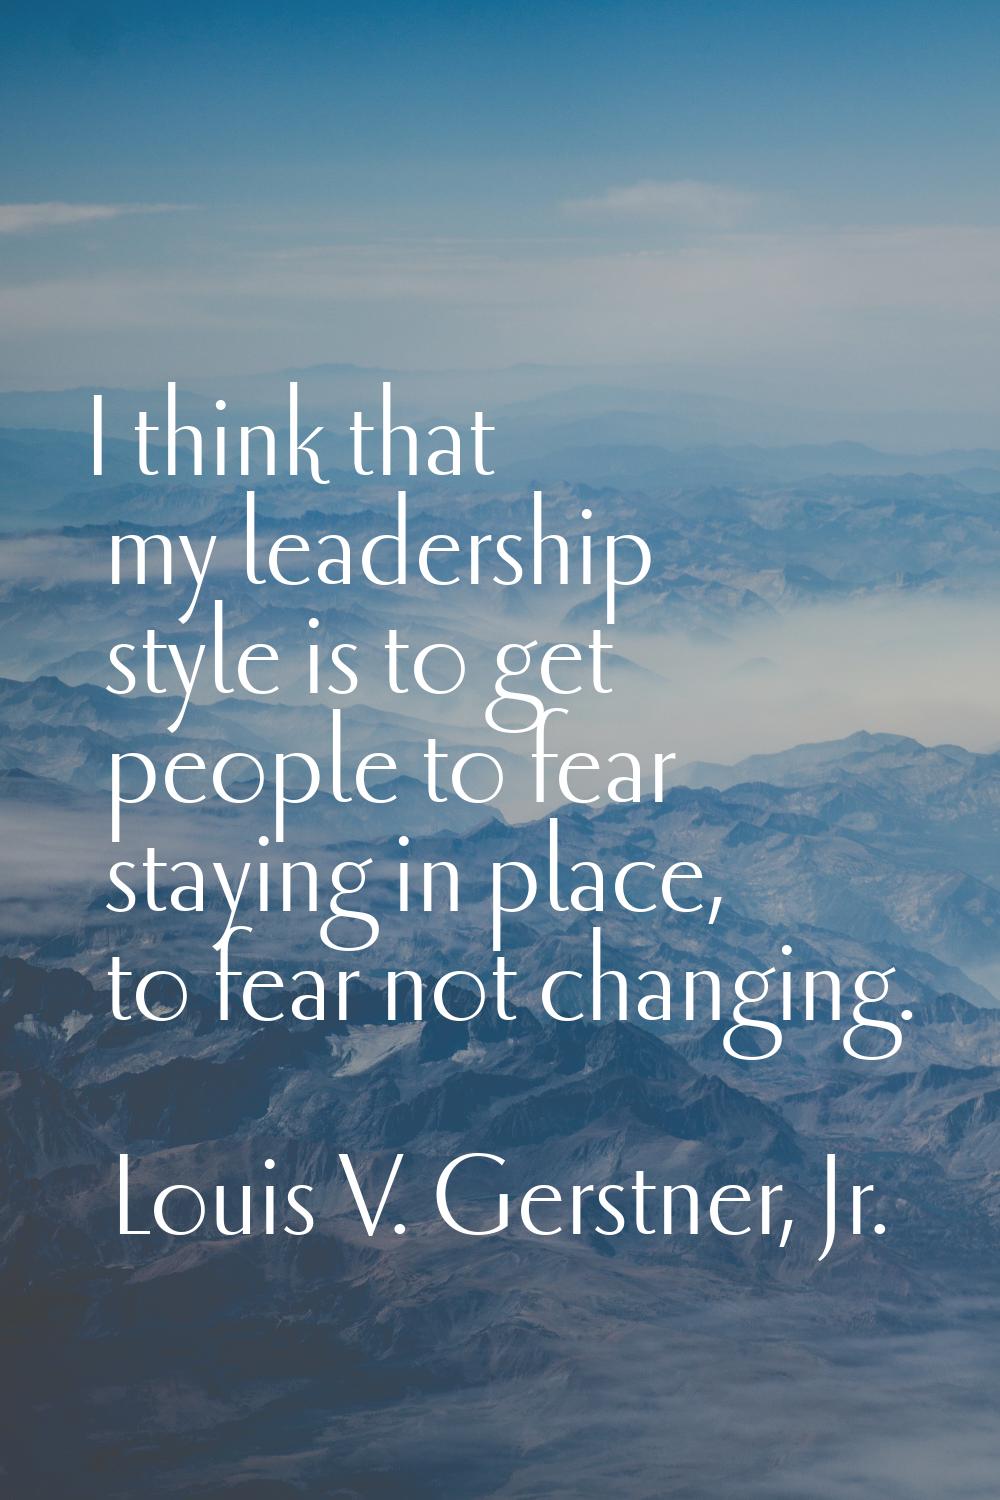 I think that my leadership style is to get people to fear staying in place, to fear not changing.